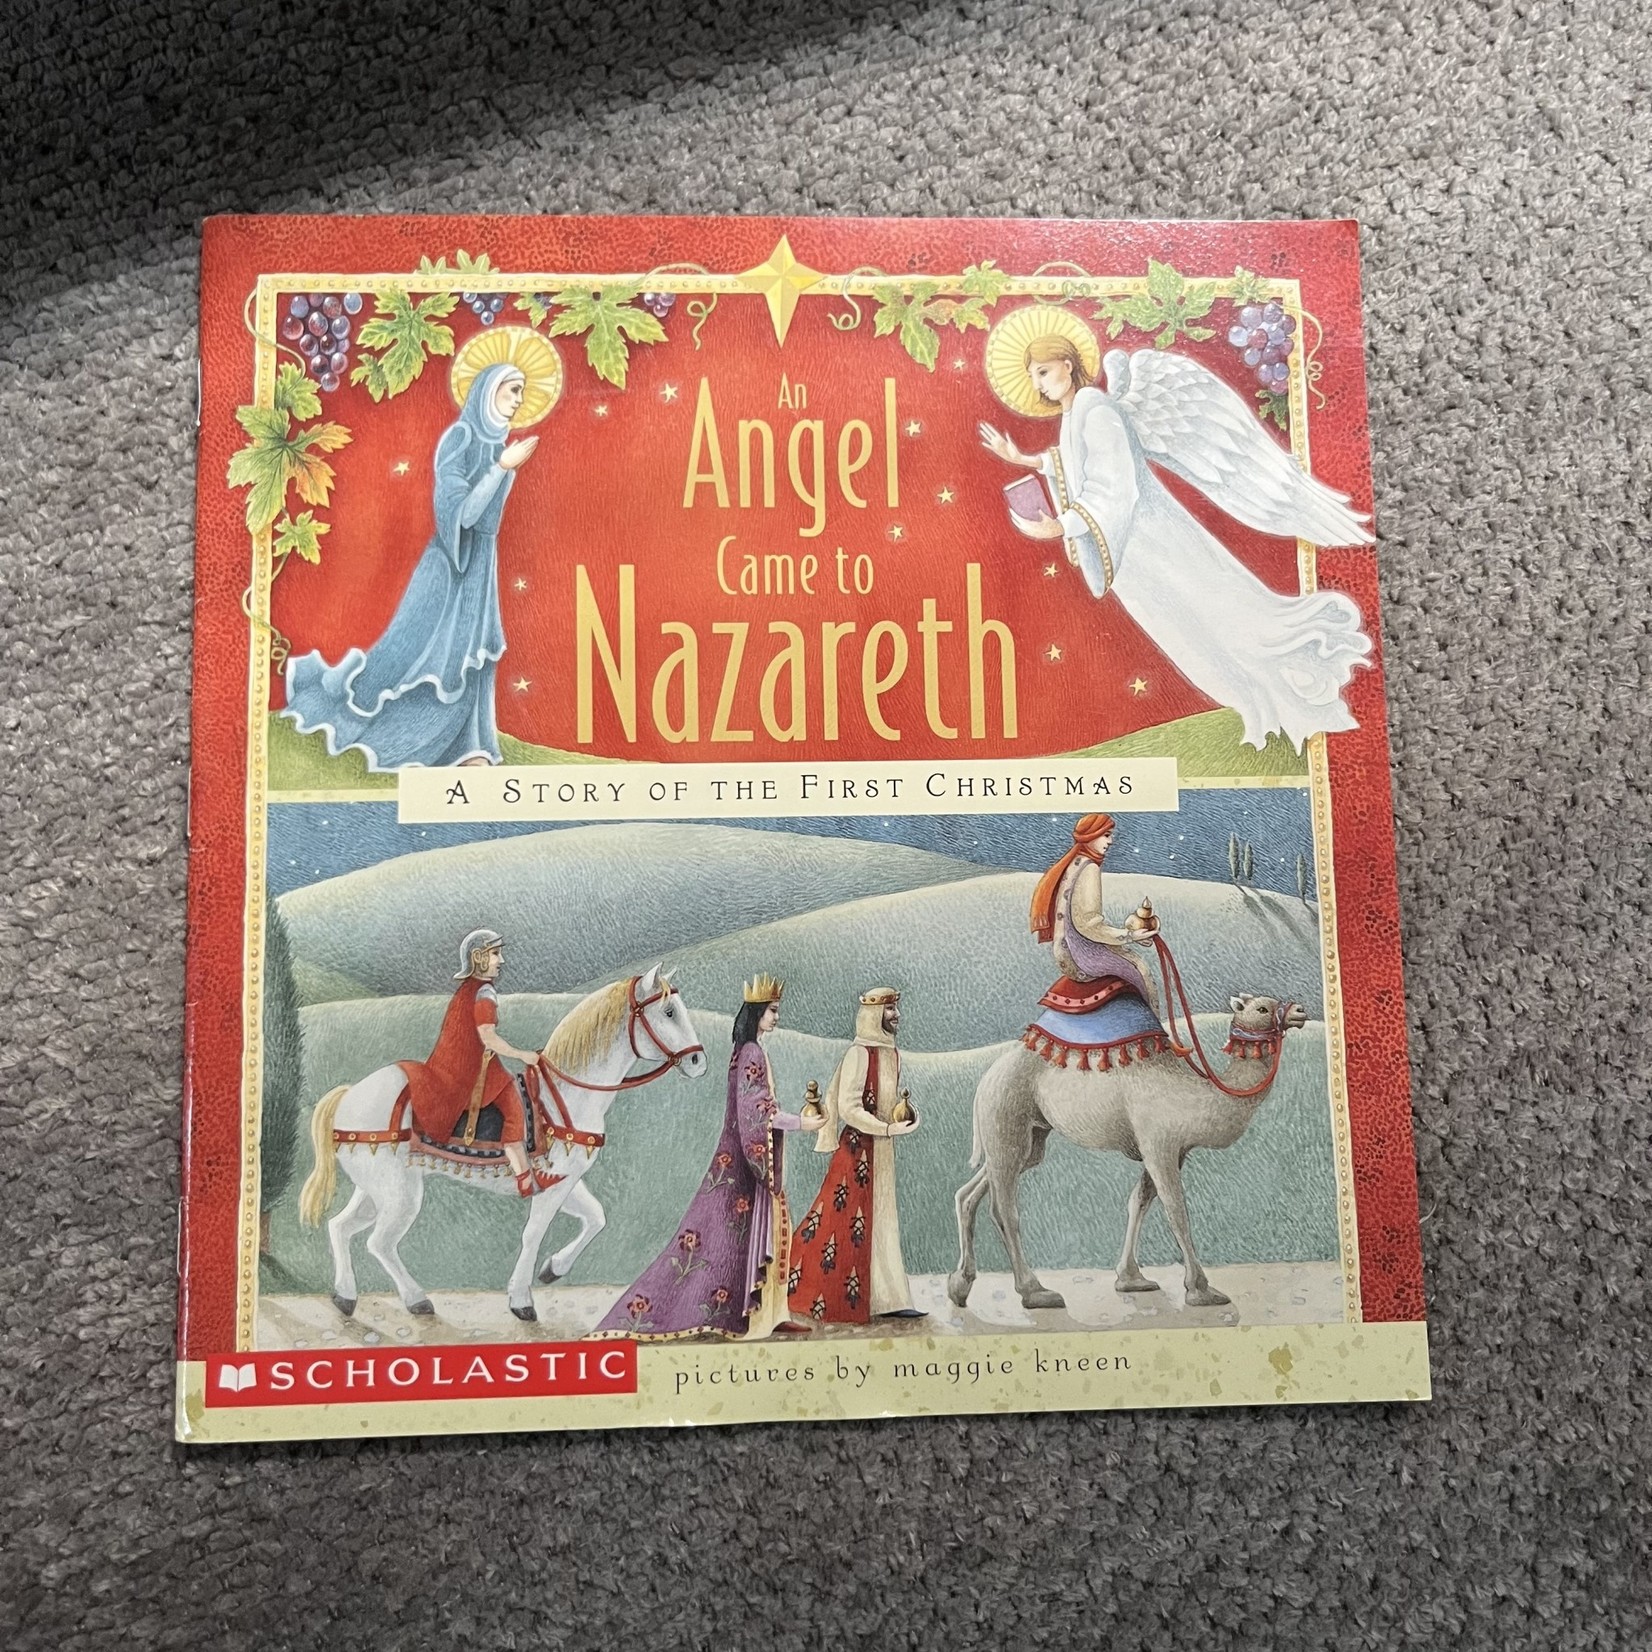 An Angel Can to Nazareth - A Story of the First Christmas